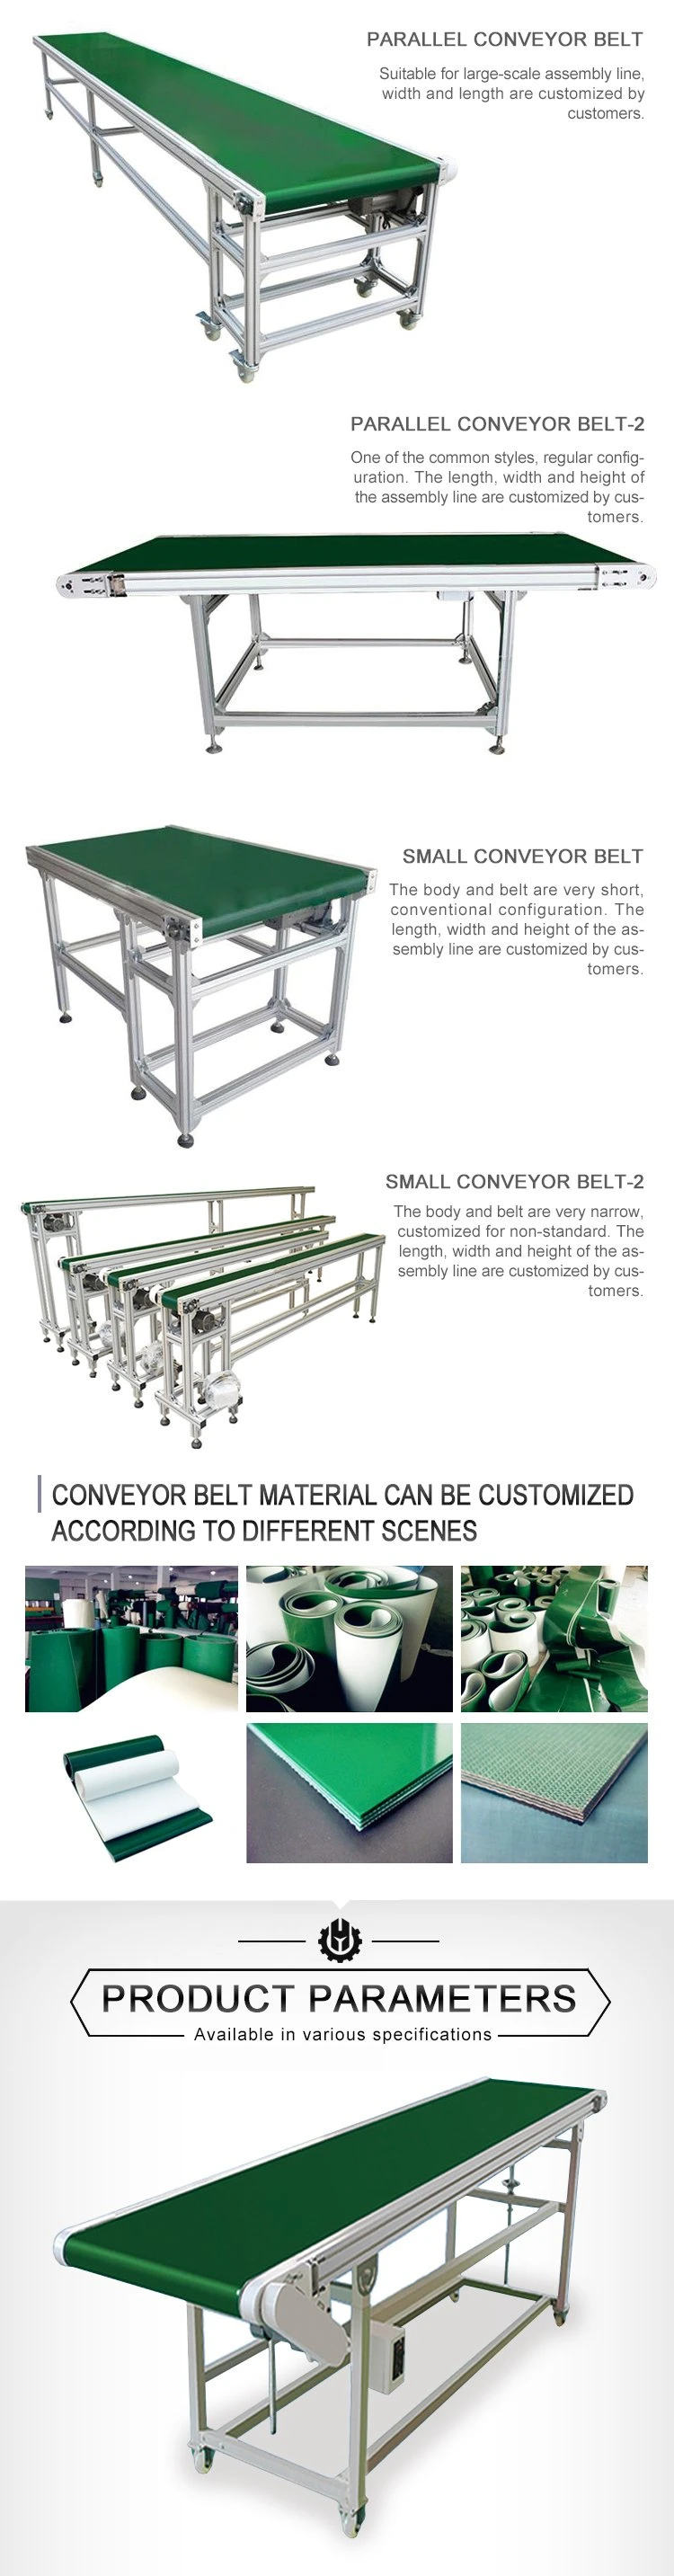 90 Degree Curve Rubber Belt Conveyor Stainless Steel Conveyor with Adjustable Height